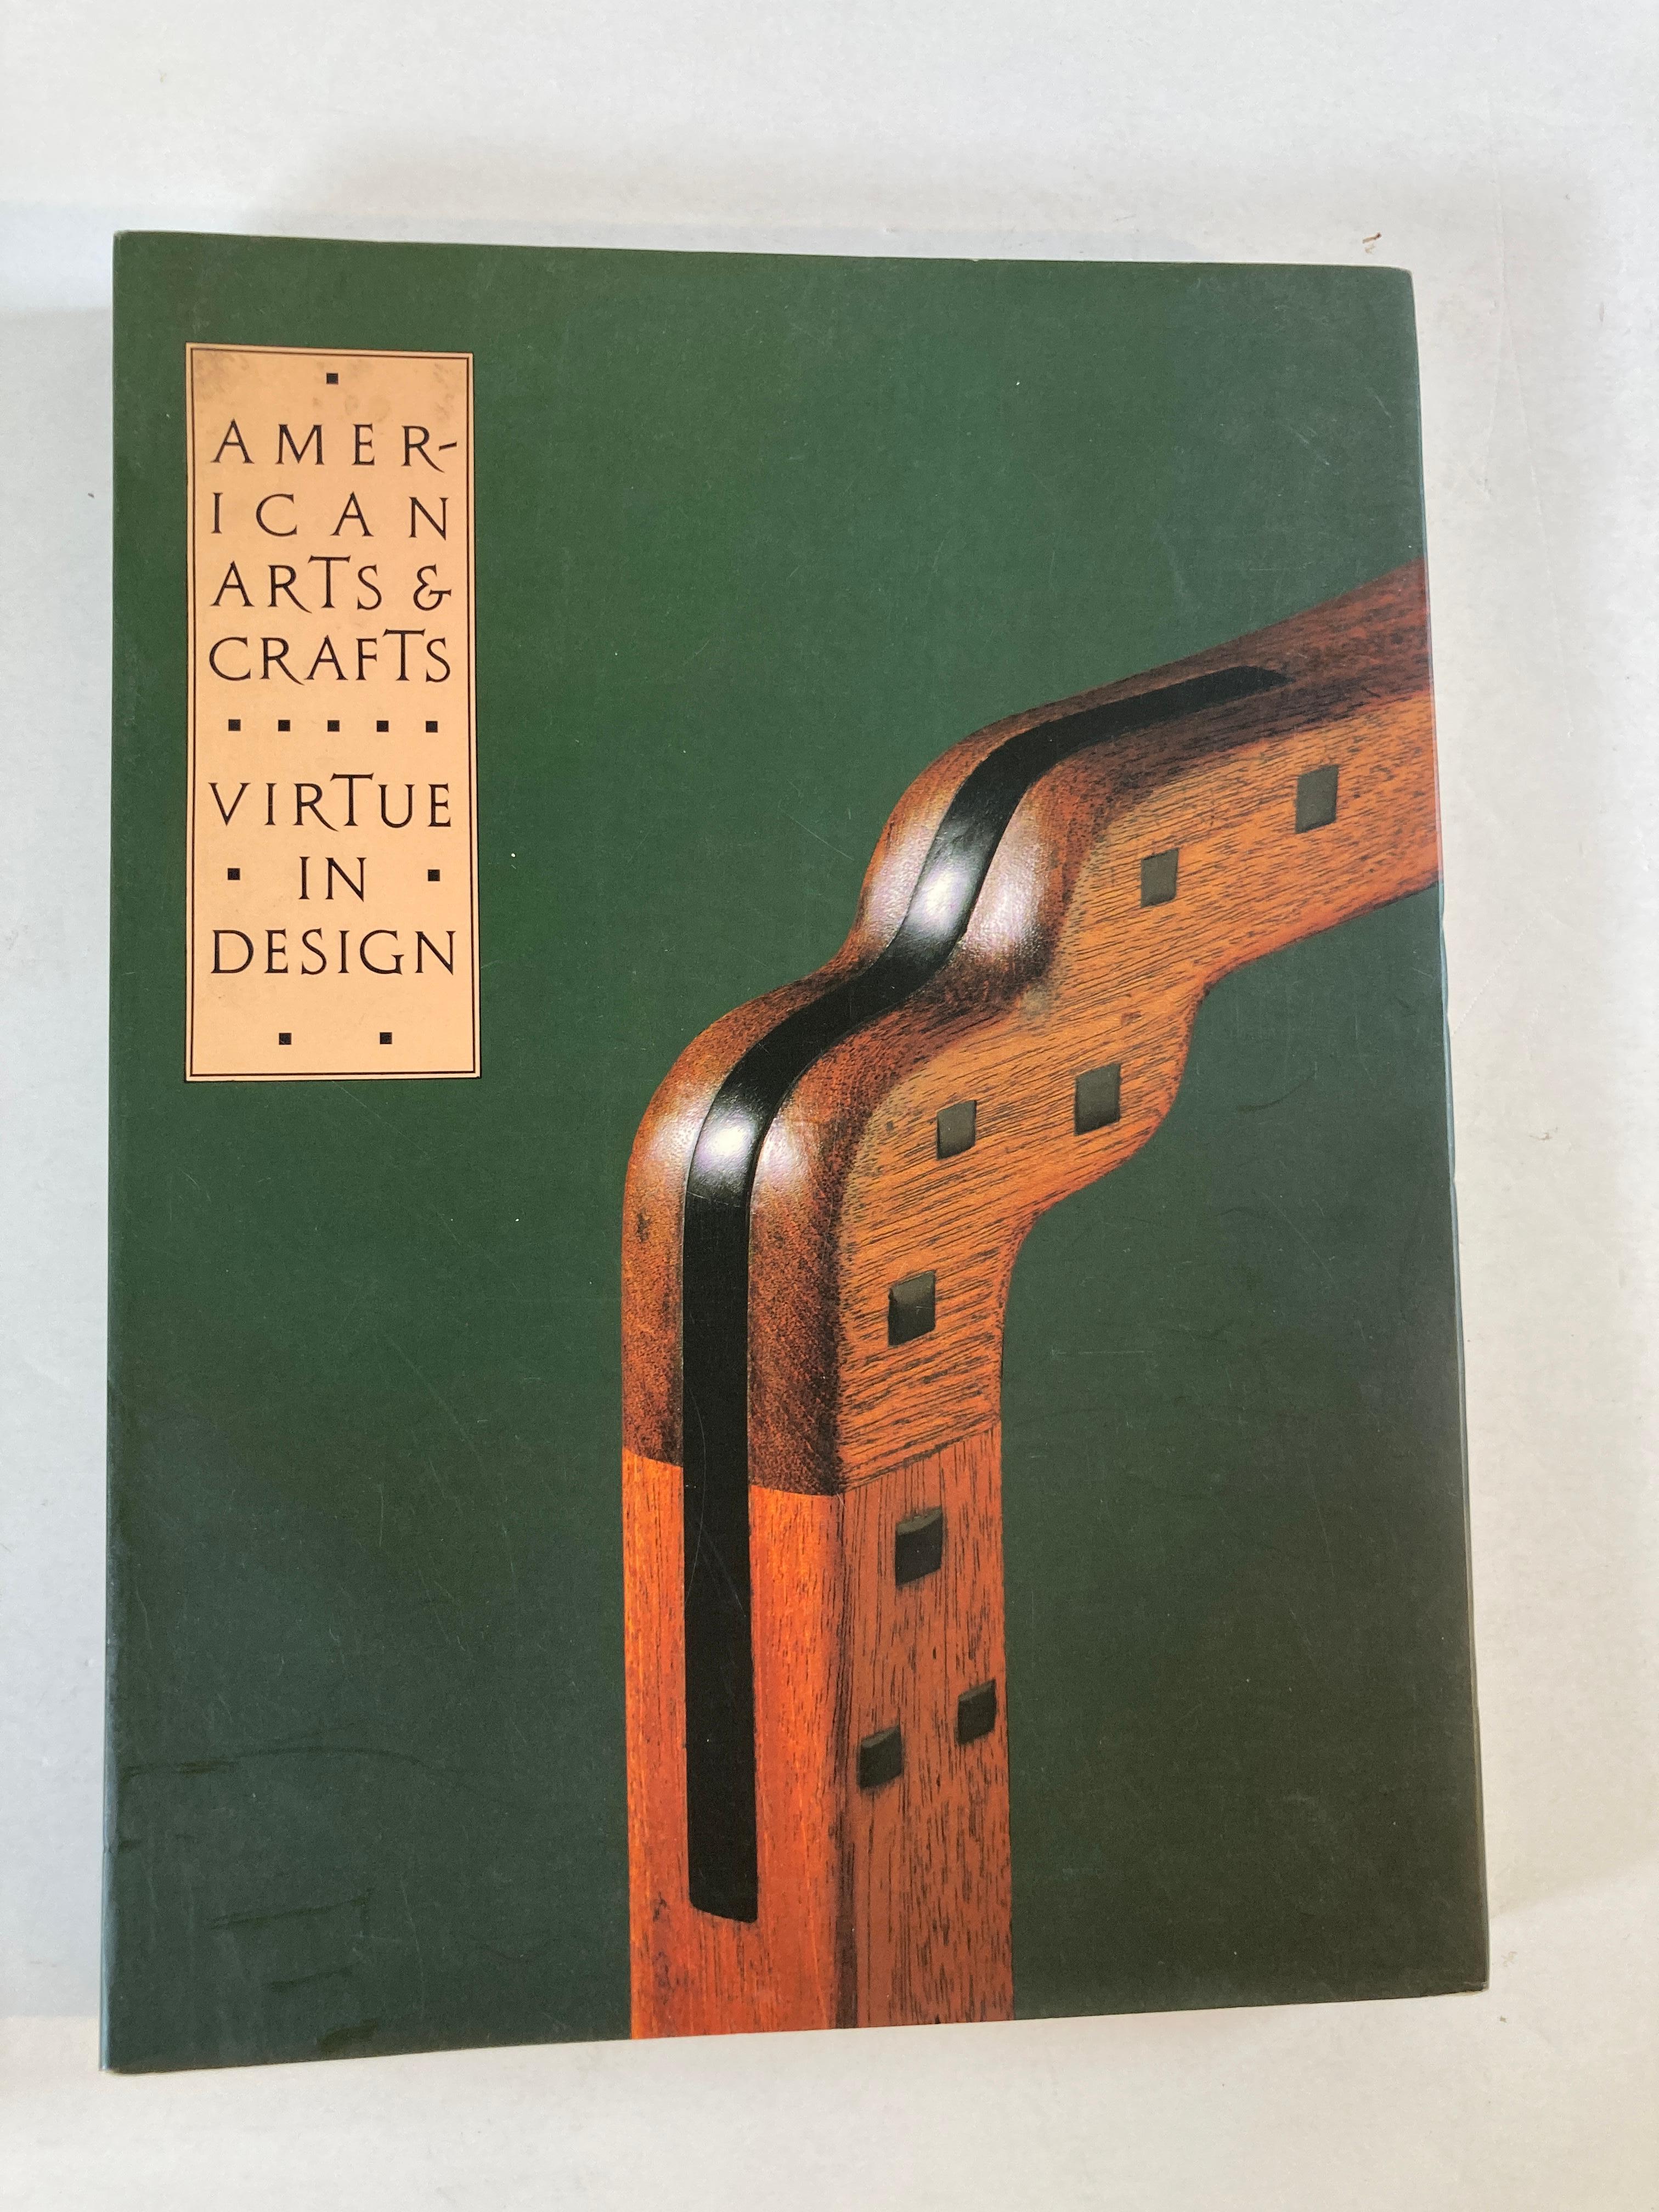 American Arts & Crafts: Virtue in Design. soft cover.
by Leslie Greene Bowman, Los Angeles County Museum of Art
Los Angeles County Museum of Art, 1992 - Design - 255 pages
Influenced by developments in Europe, American proponents in the late 19th